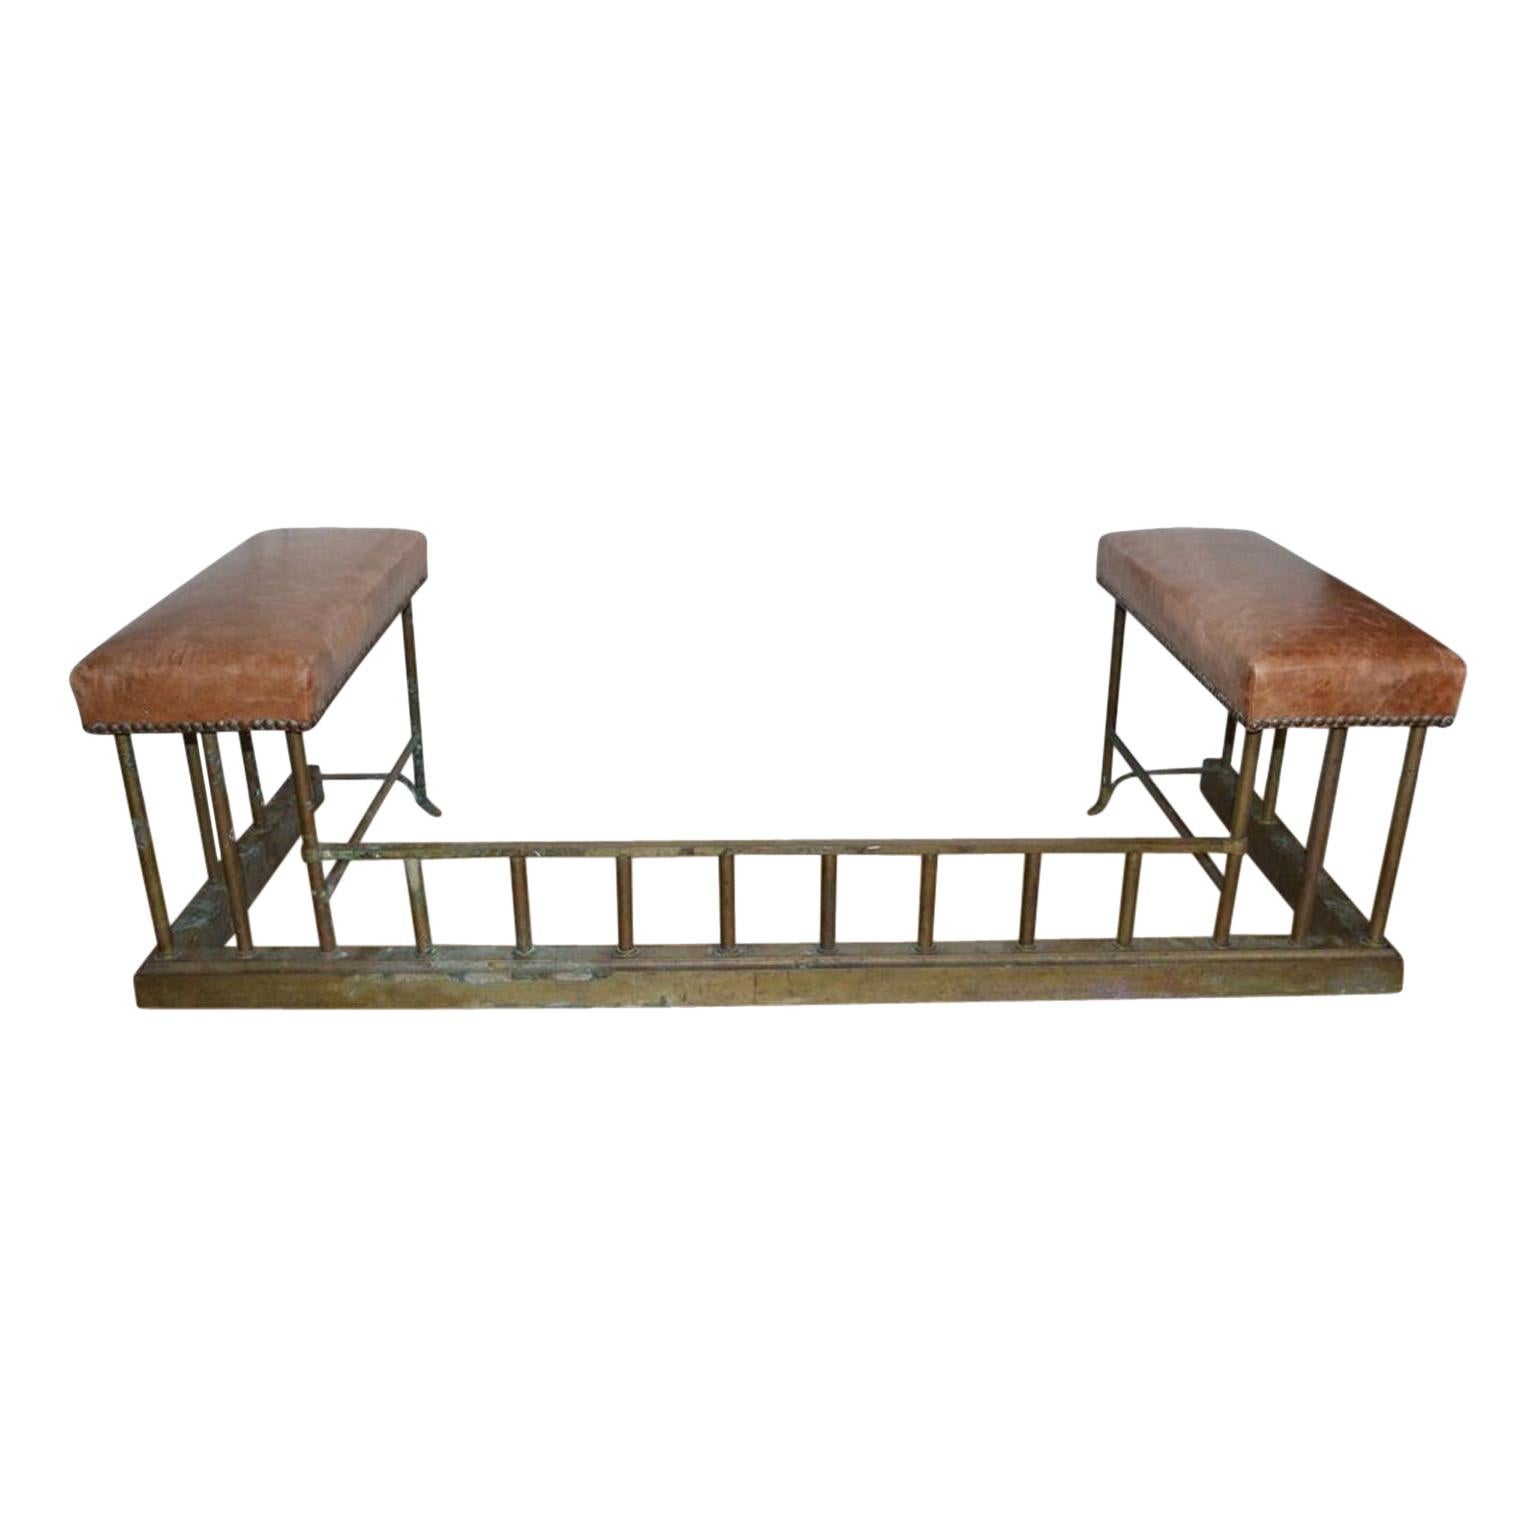 Brass and leather club fire fender bench in solid vintage brass with leather hide seats.